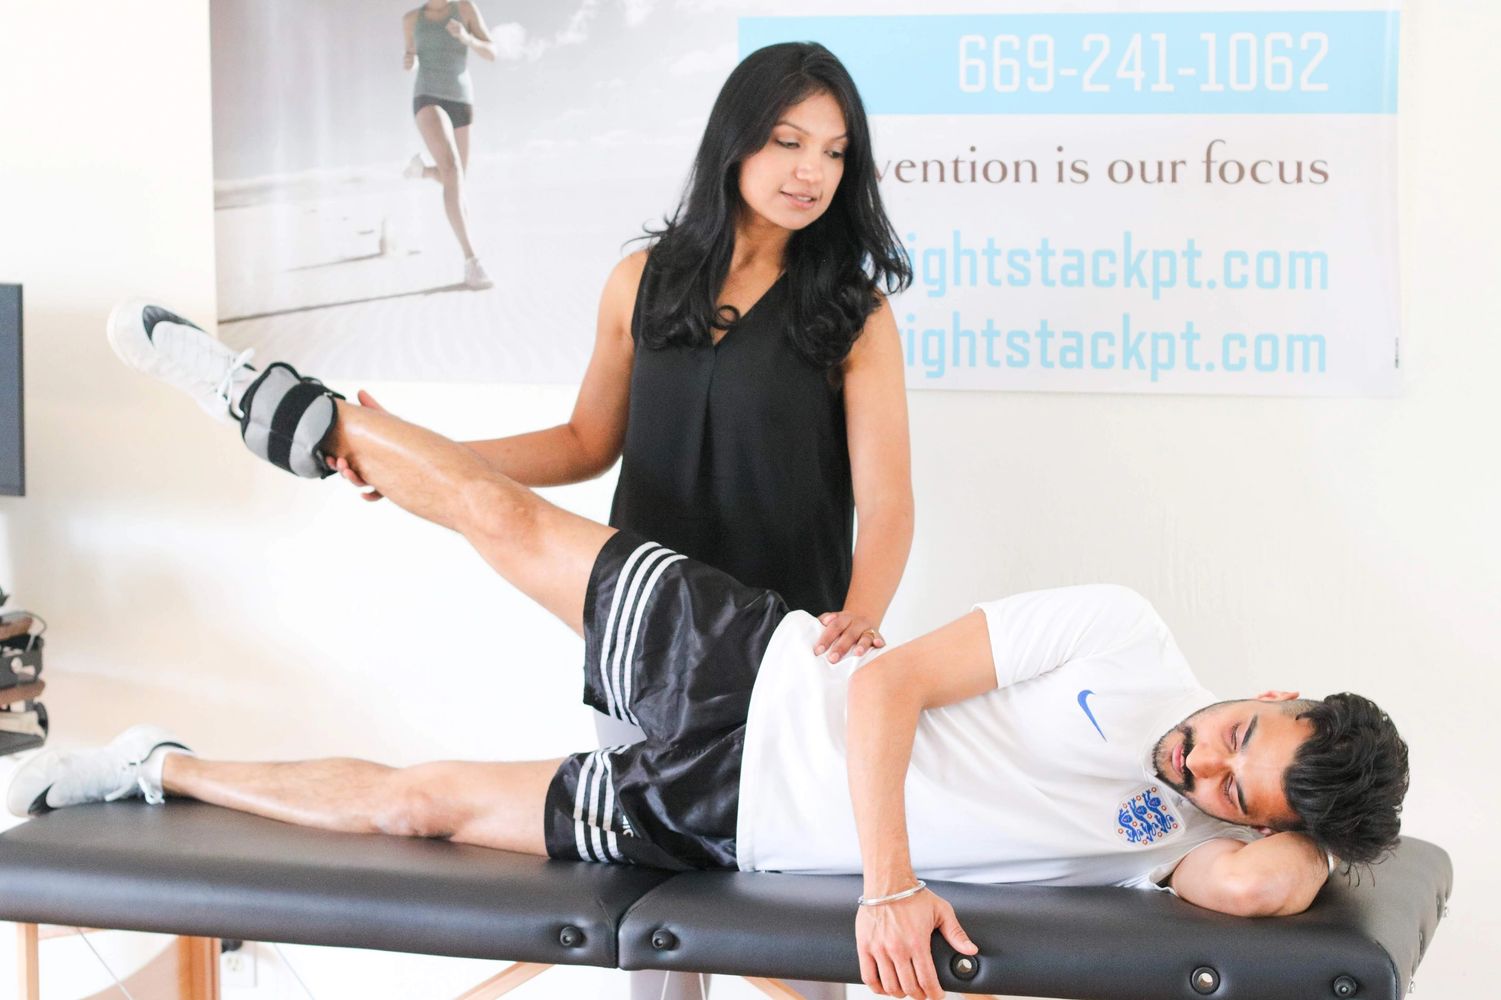 Right Stack Physical therapy, California Physical Therapy, PT in Sunnyvale, Physical therapy